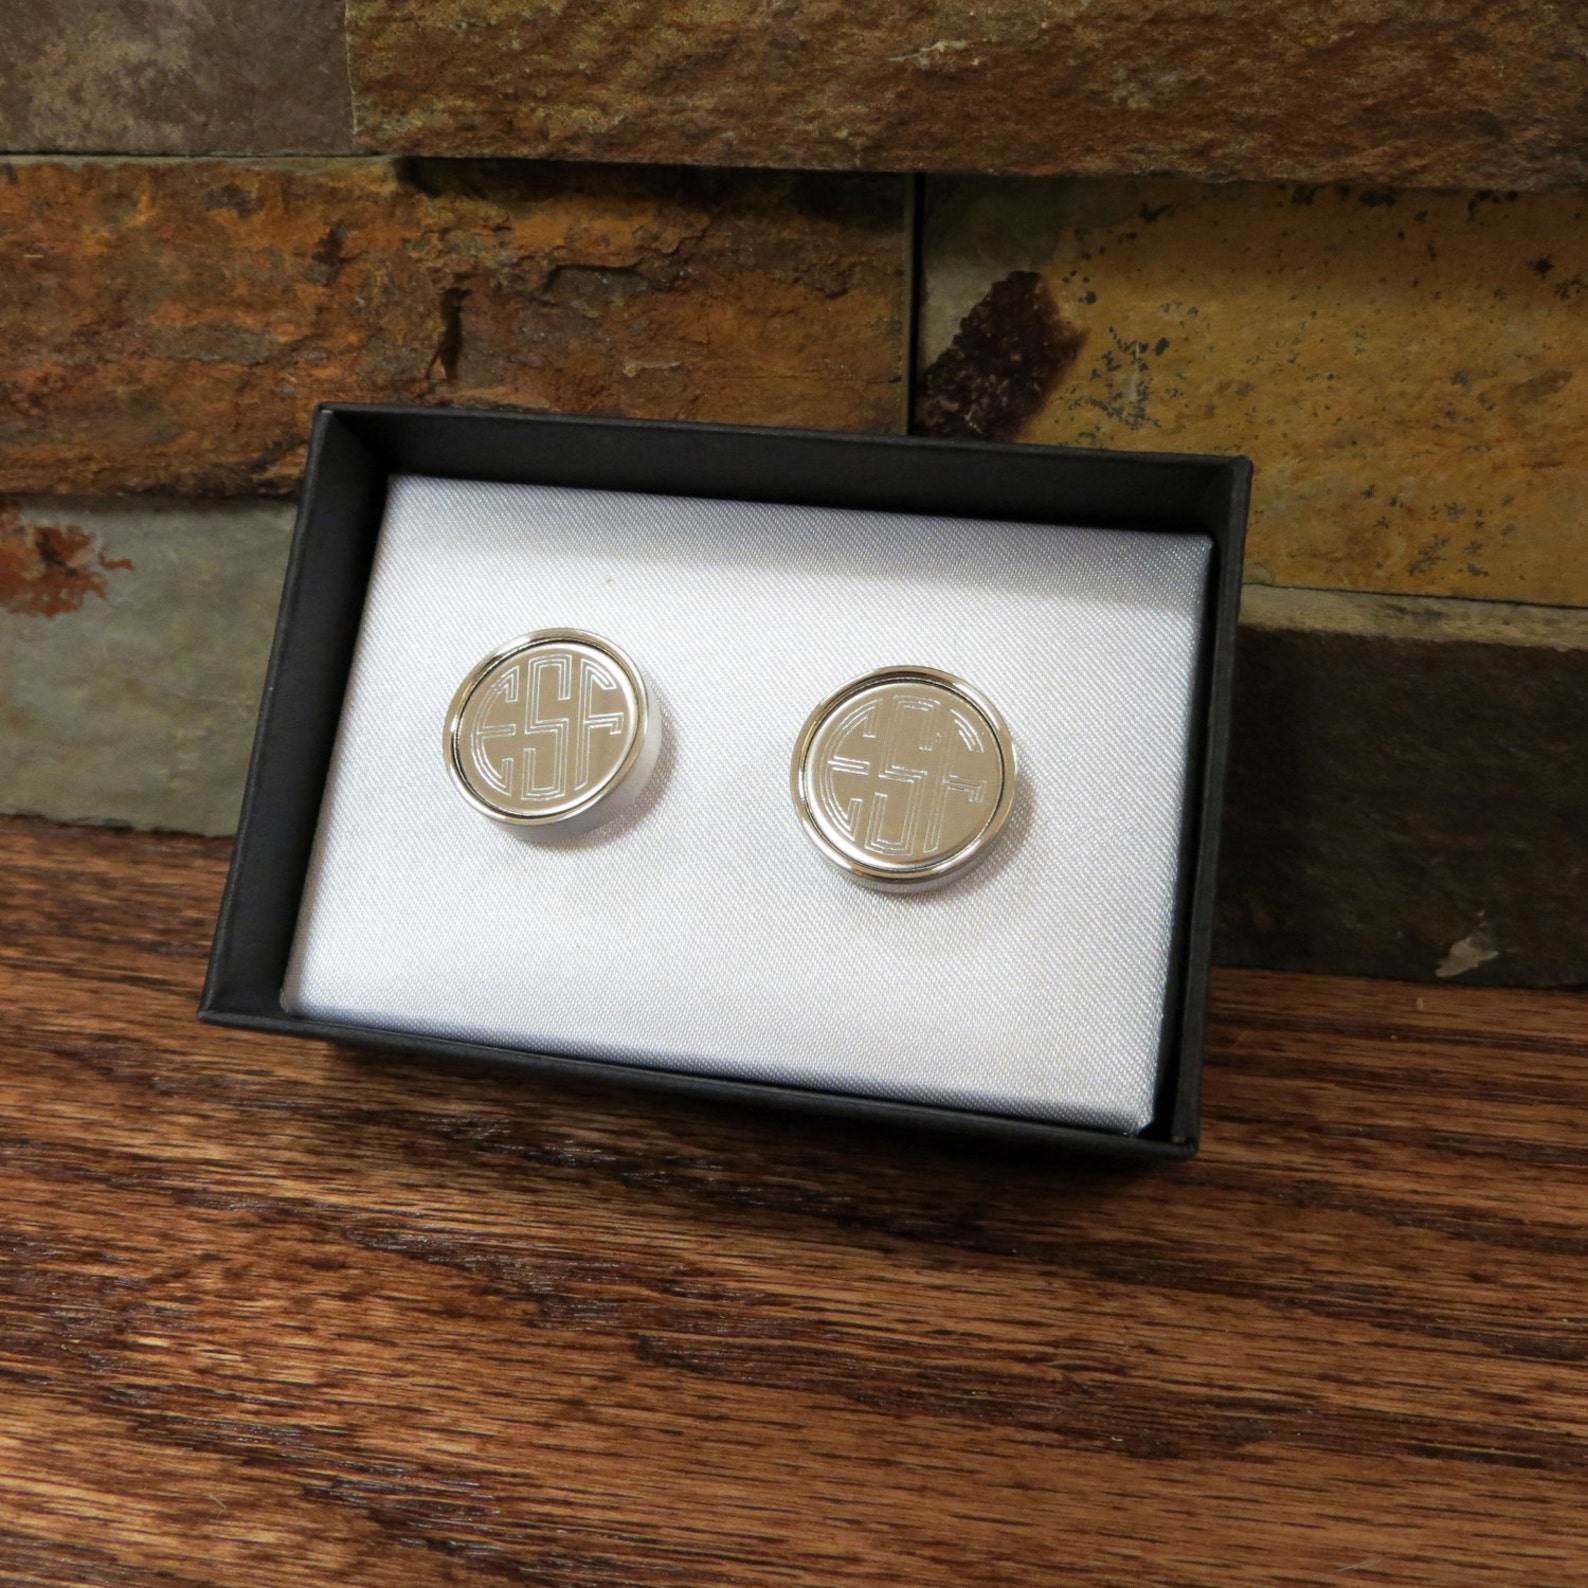 Personalized Round Cuff Links Monogrammed Groomsmen Gift | Etsy